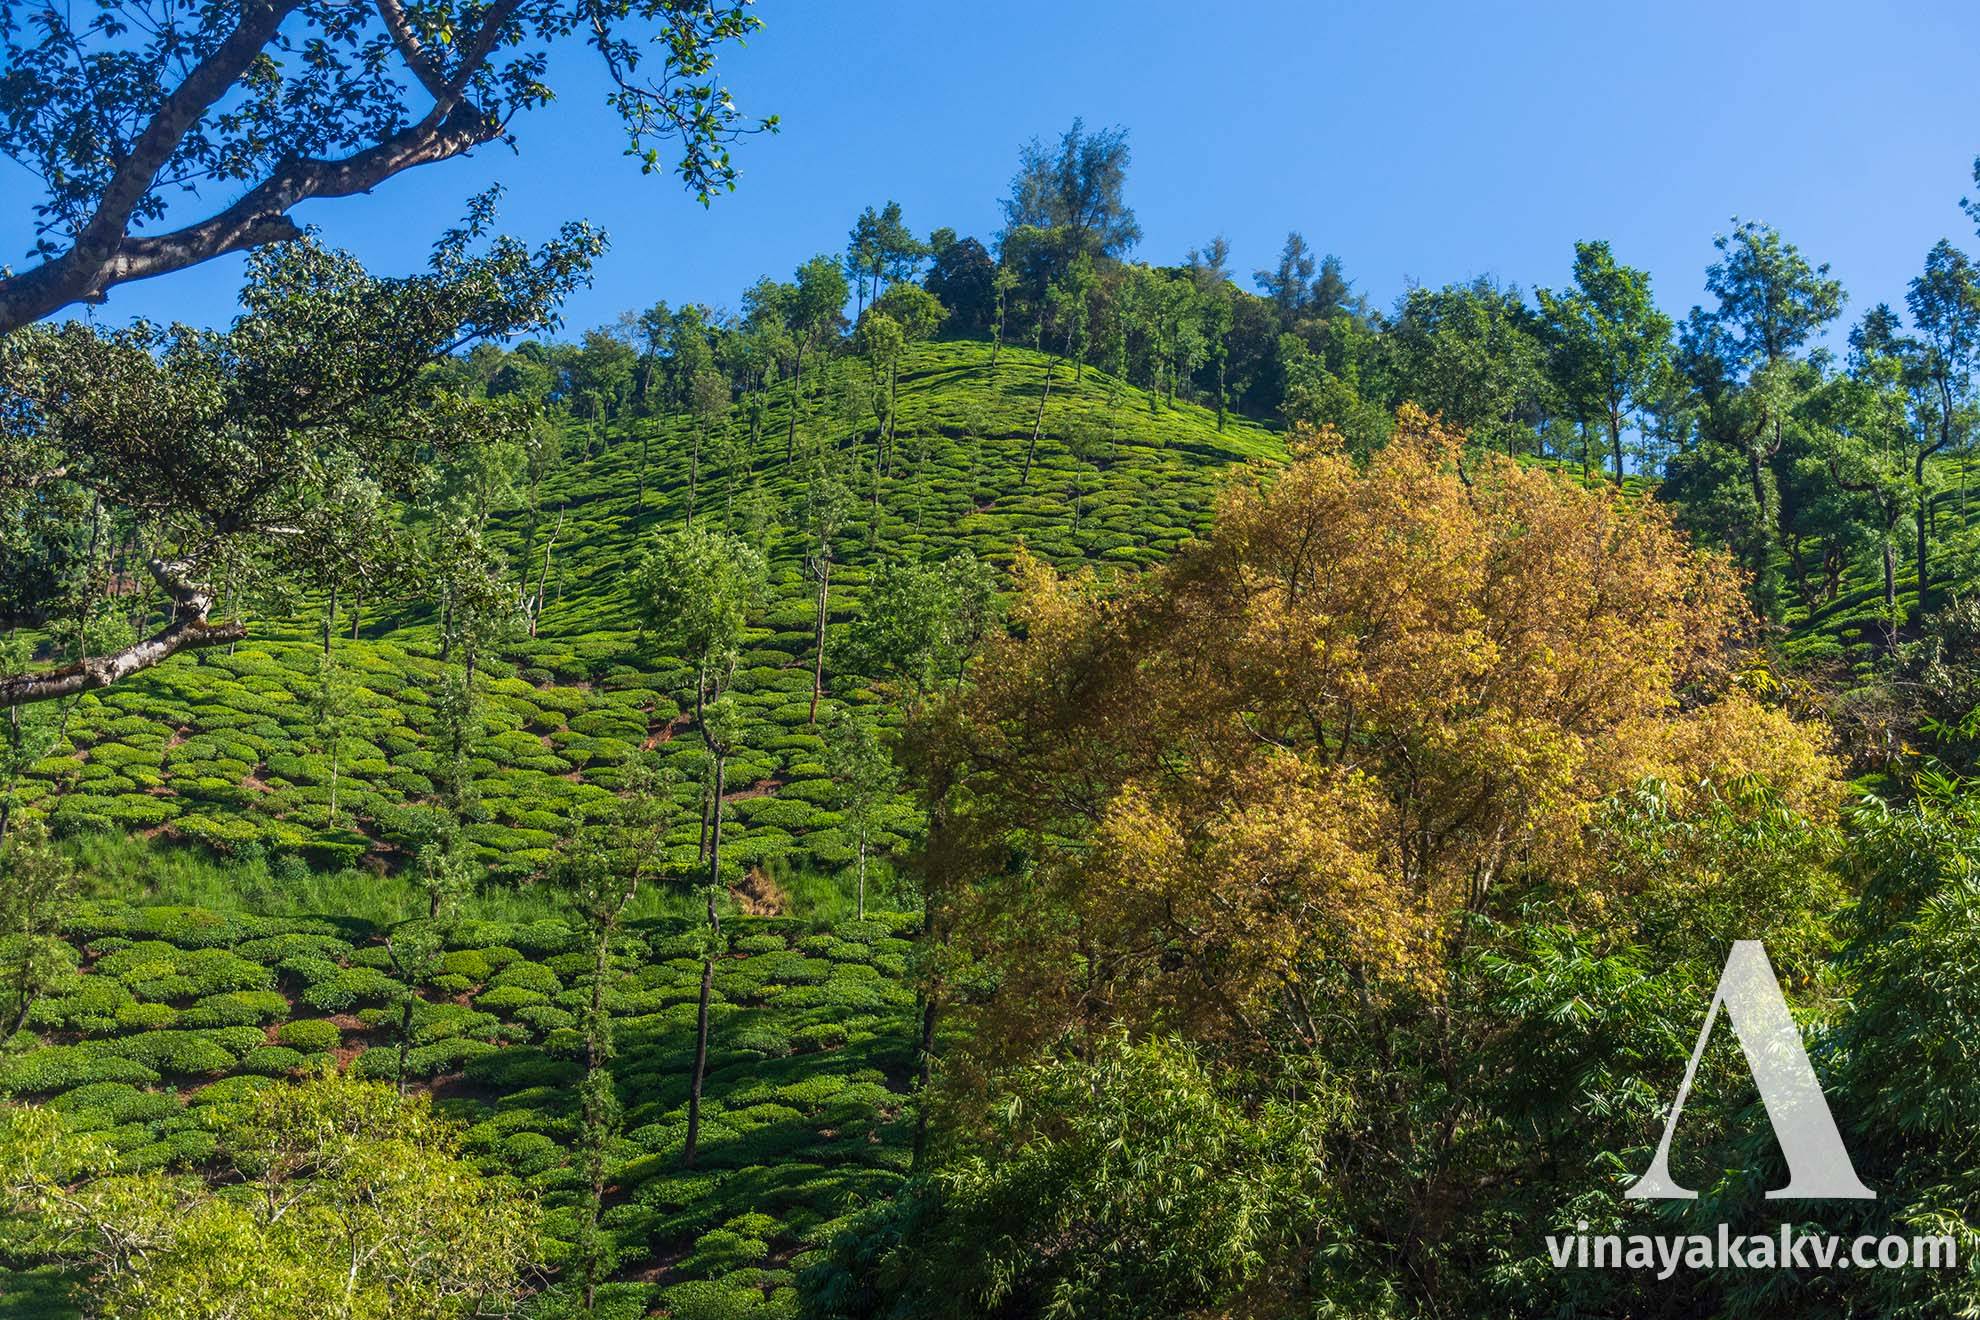 A mountain in the _Kelagur_ tree plantation, a beautiful tree with fresh yellow-colored fresh foliage in the foreground.